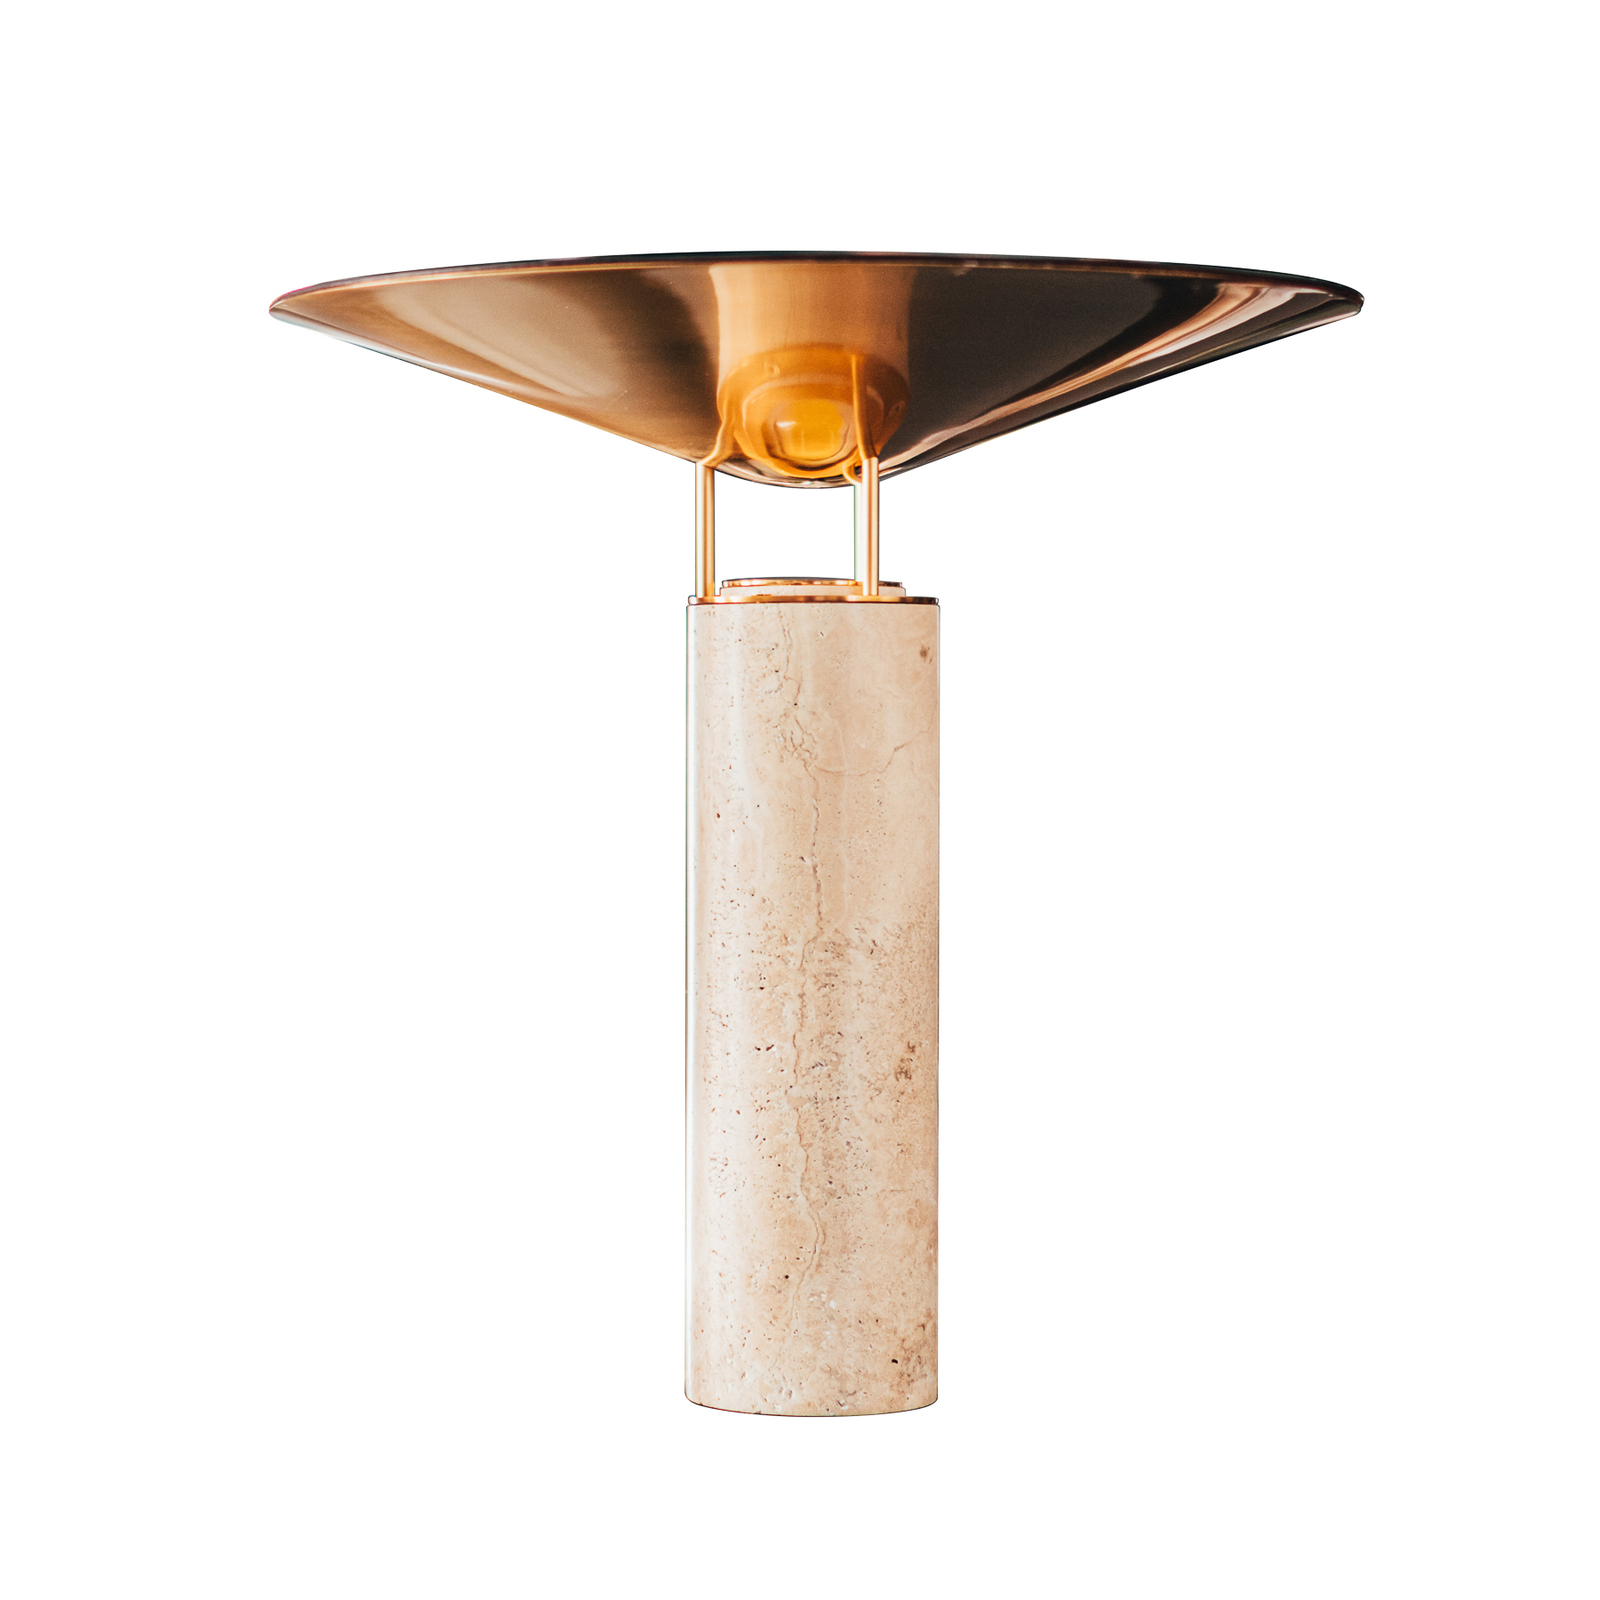 Rebound LED table lamp, travertine, brown leather